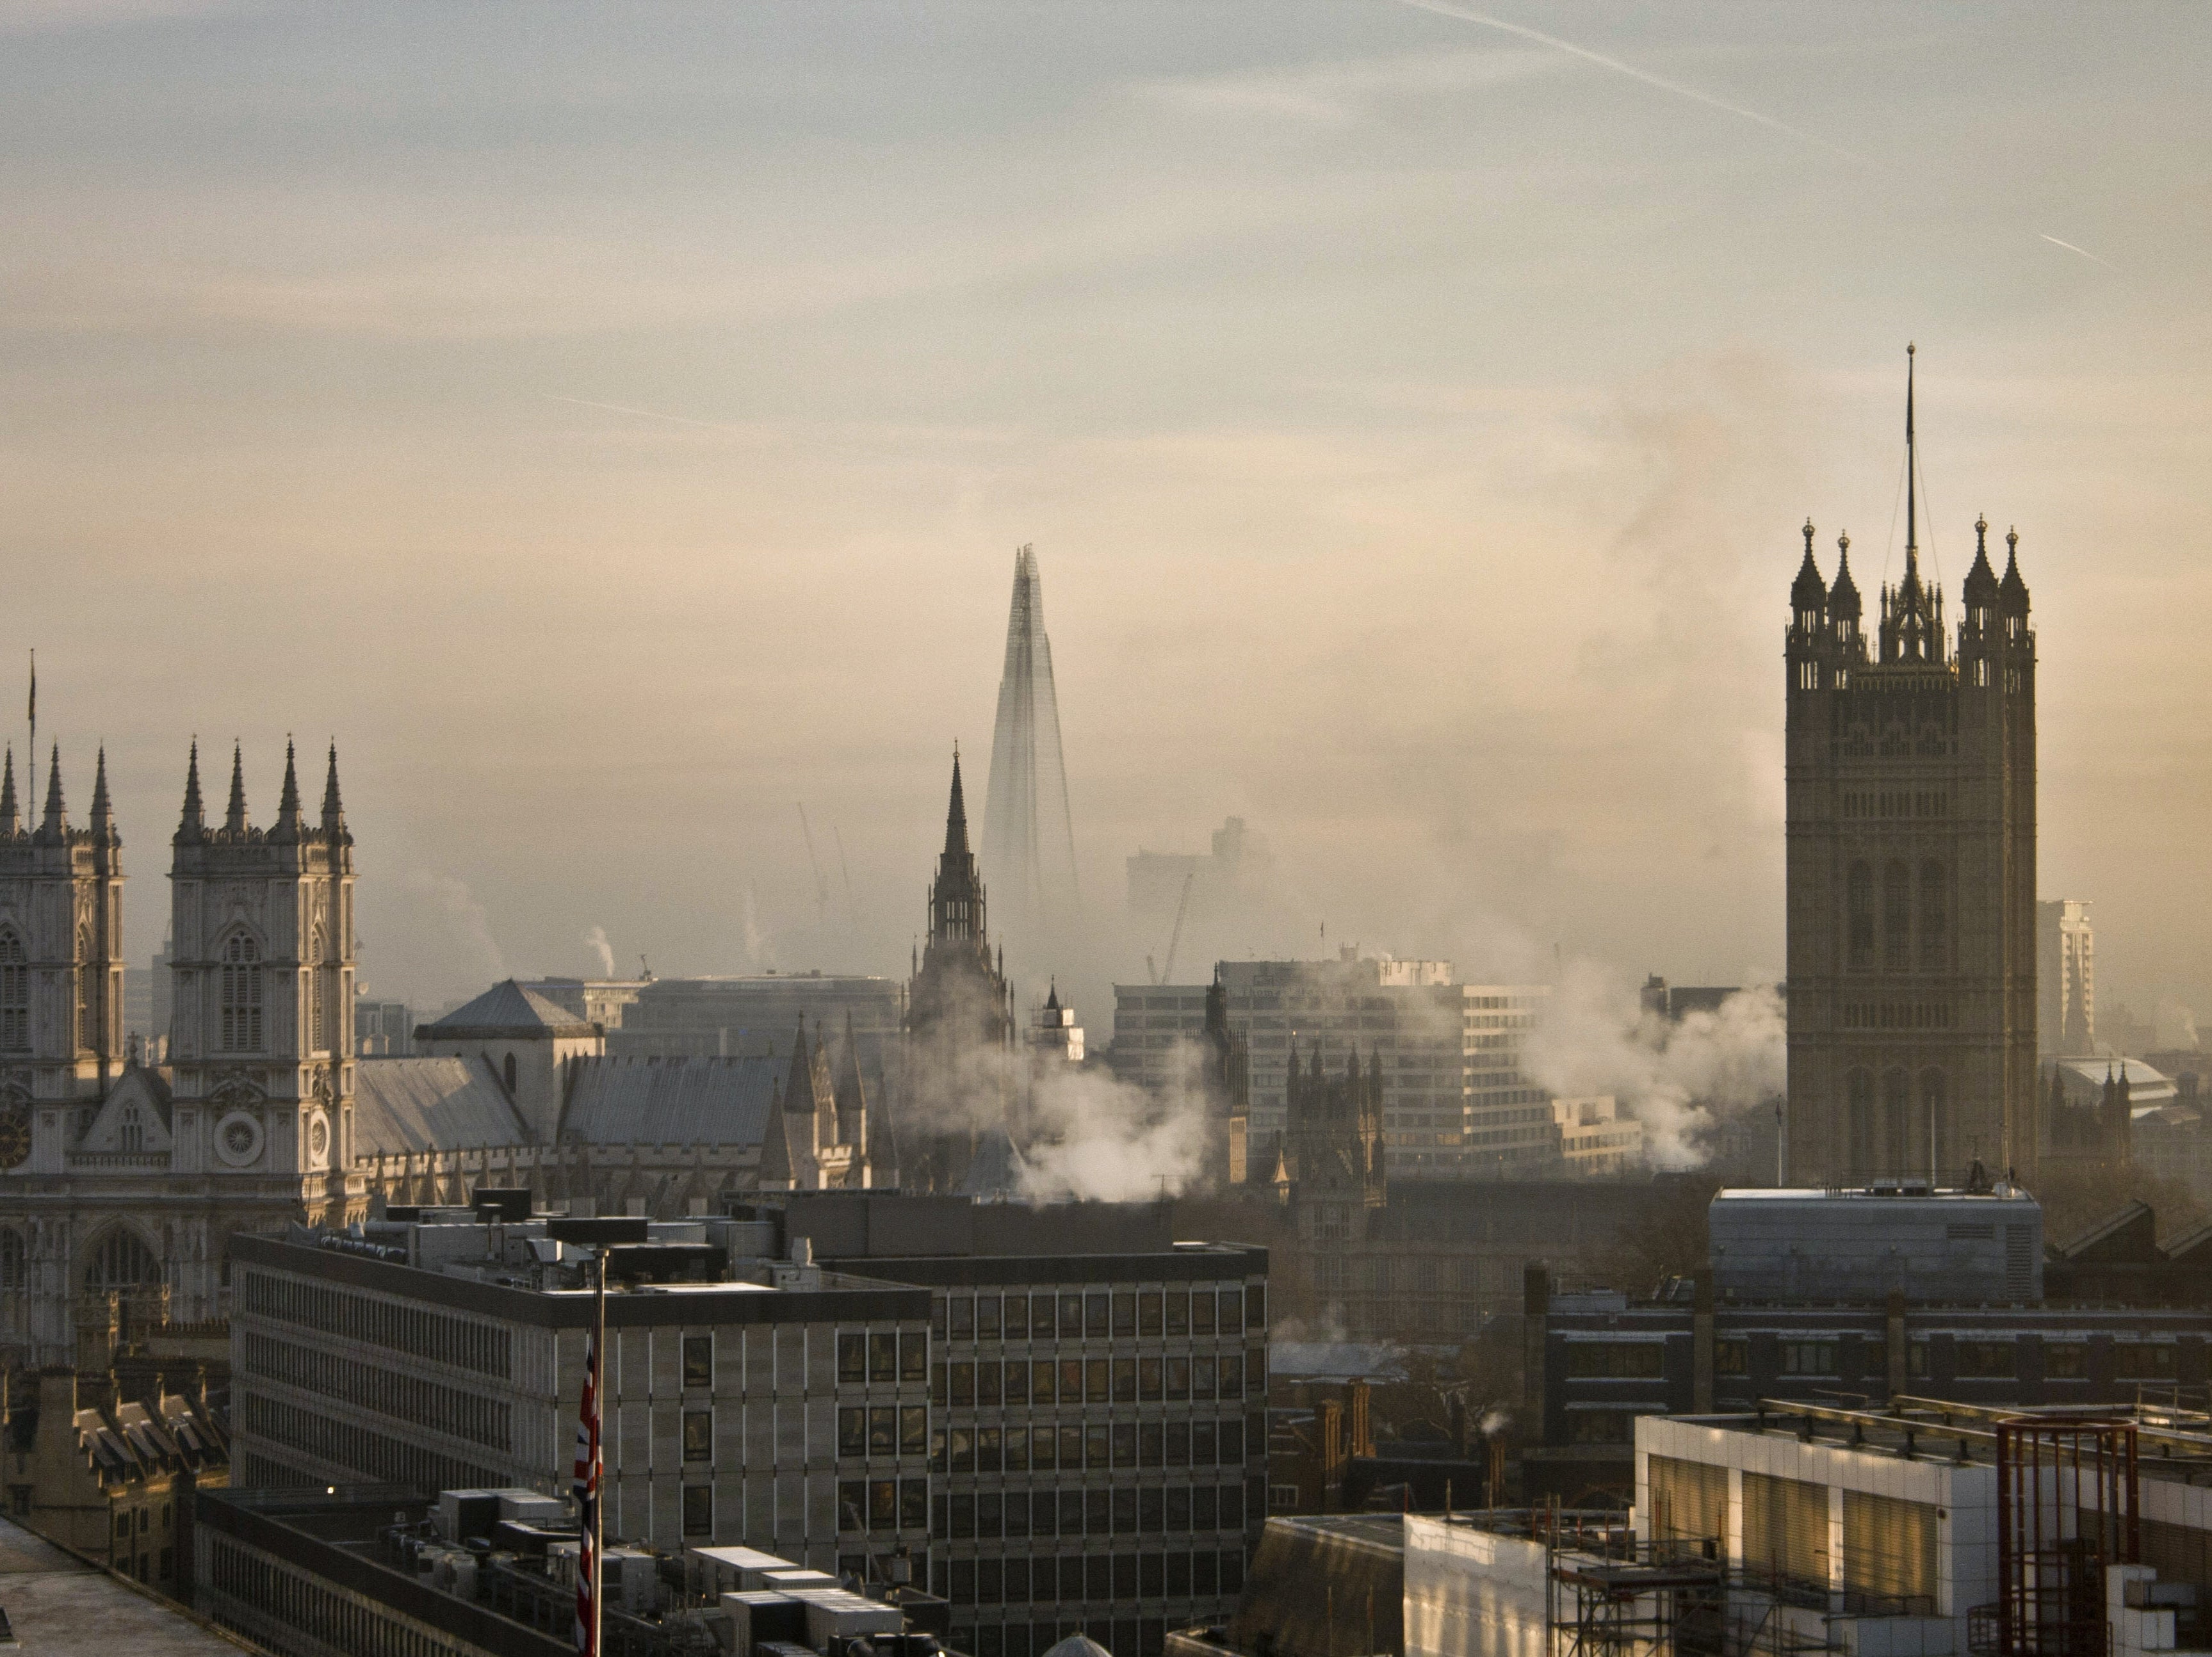 A high pollution warning has been issued for London amid ‘extremely dangerous’ toxic air